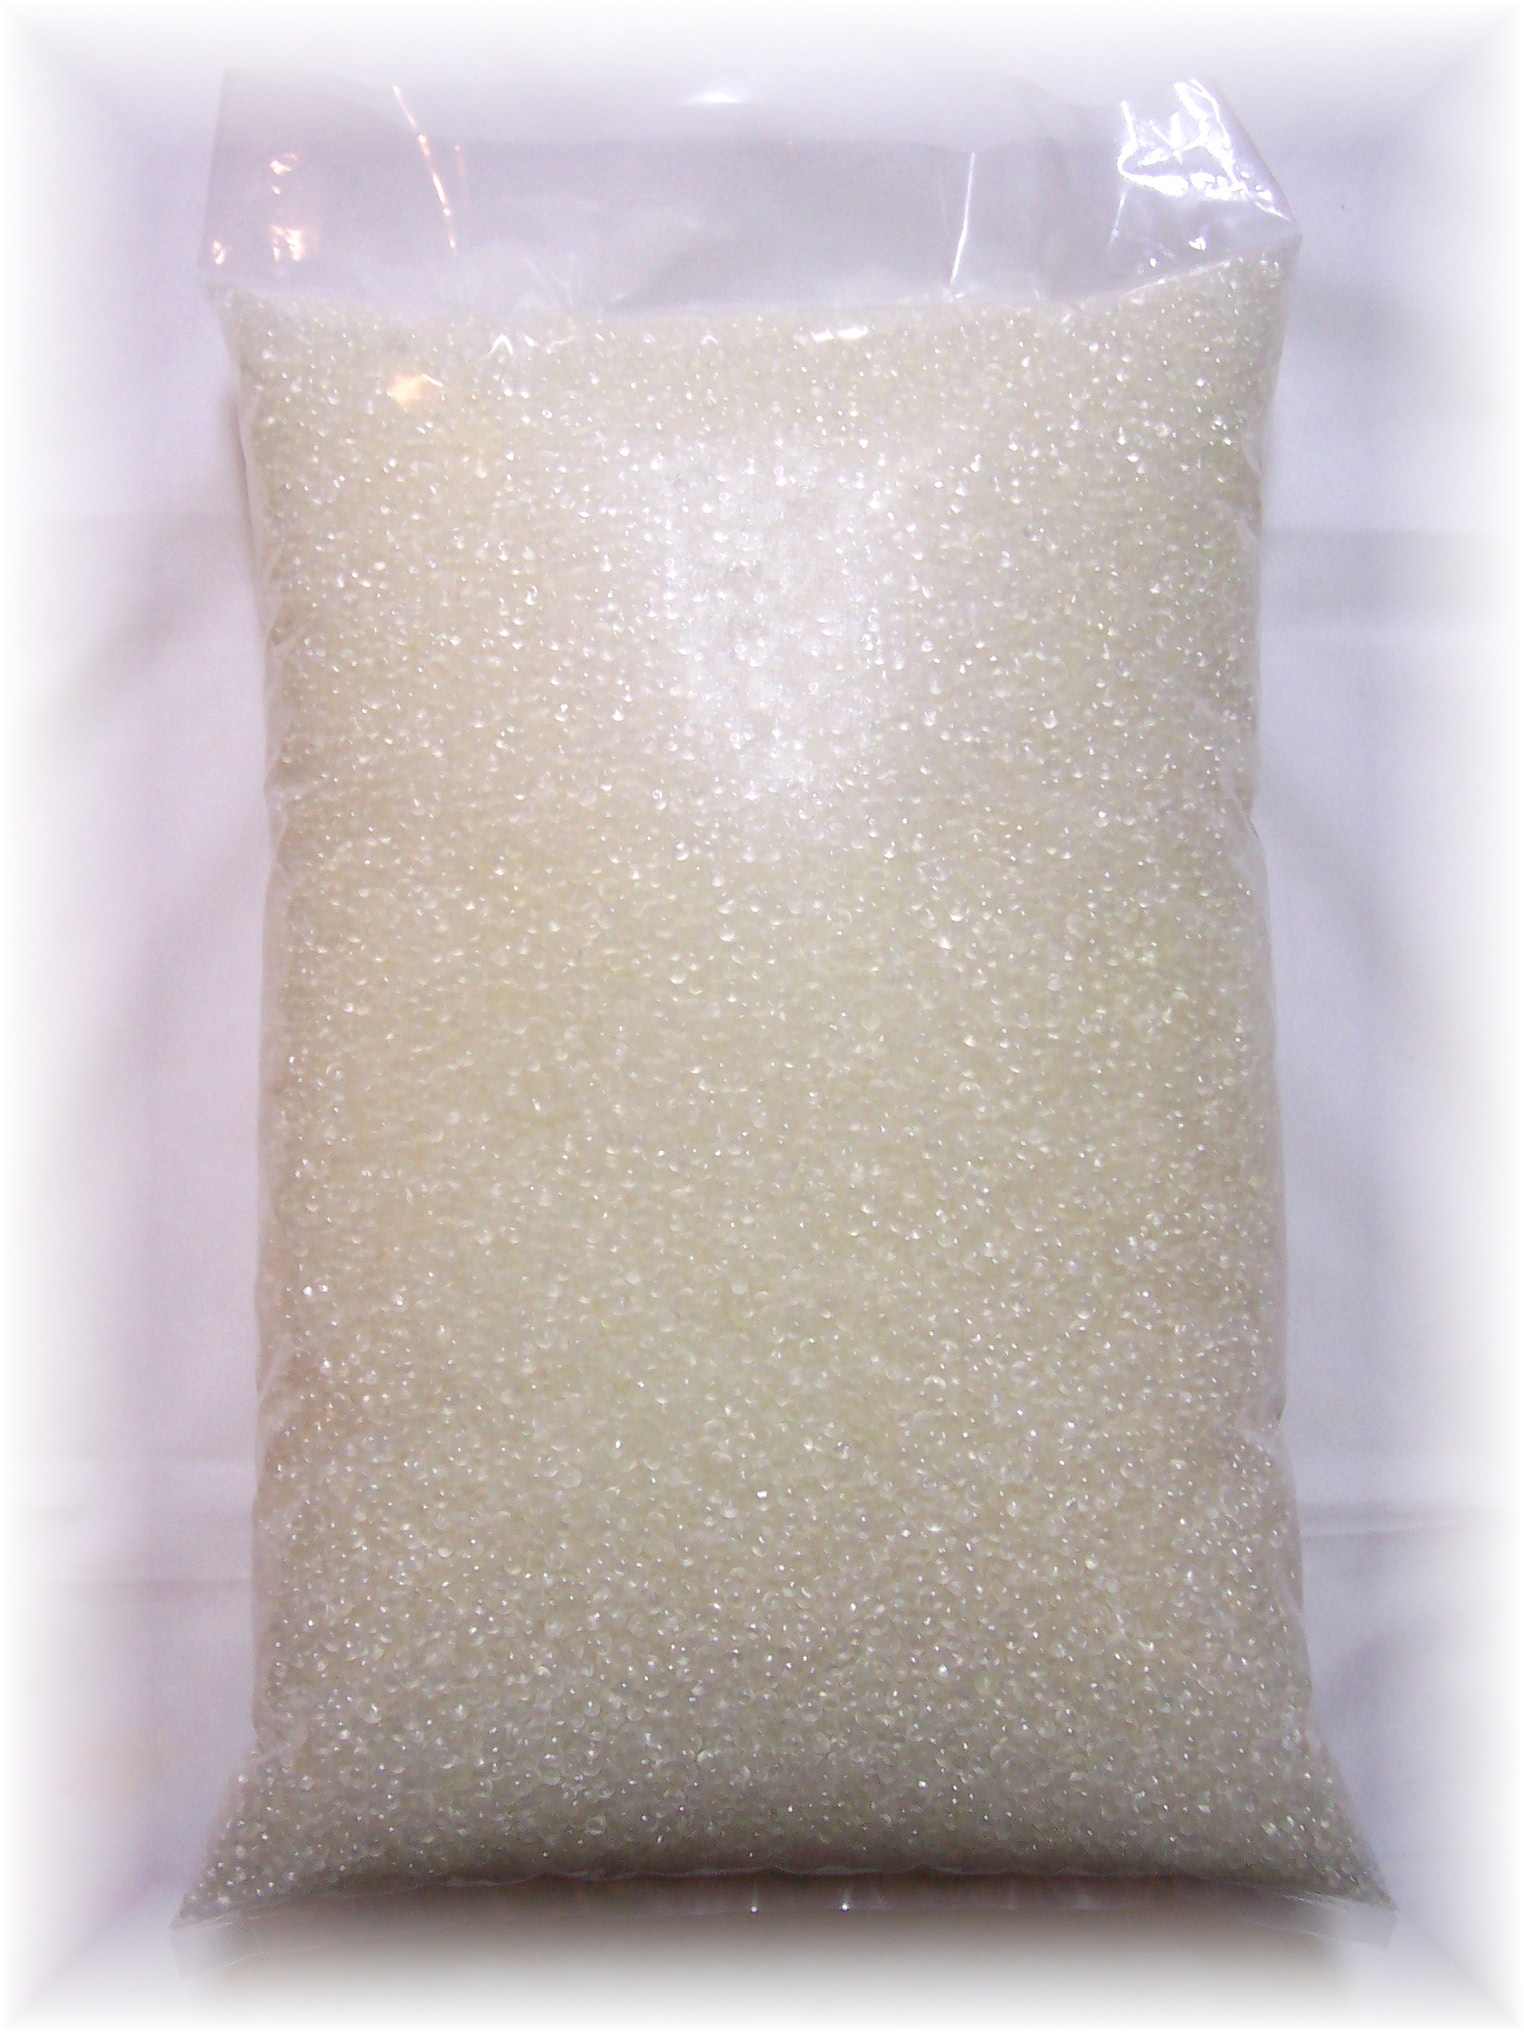 Scented Aroma Beads 5 lb. Mixed Variety [AB5LBMIX] - $75.99